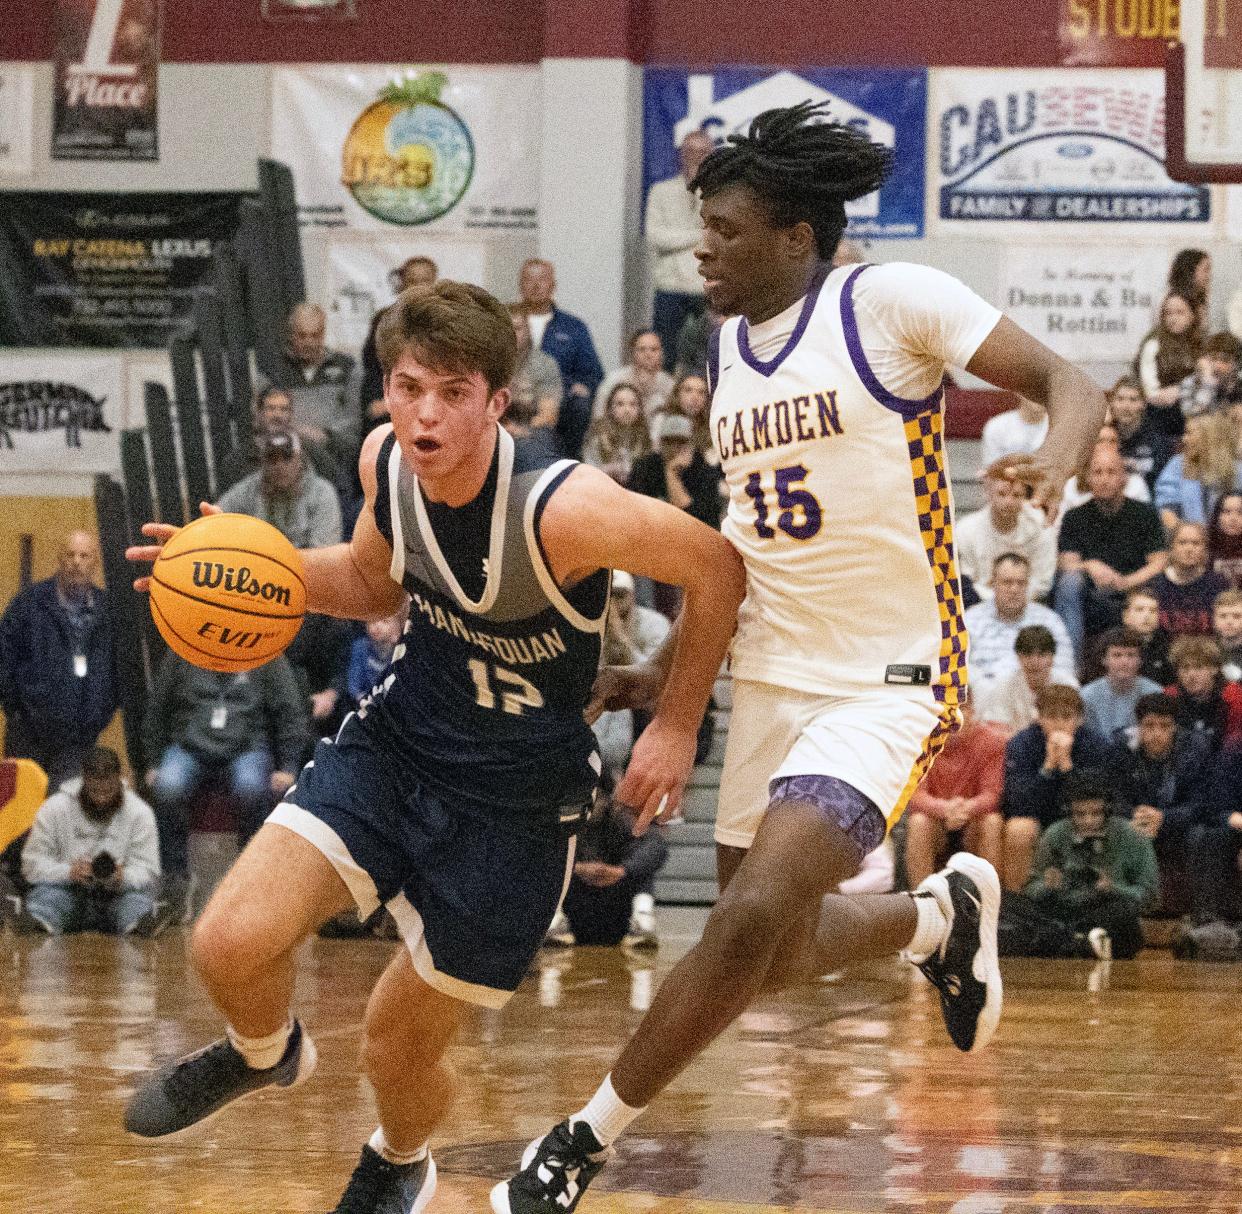 Squan’s Griffin Linstra drives to the basket. Manasquan Boys Basketball lose to Camden in NJSIAA Group 2 Semifinals in Berkeley Township, NJ on March 5, 2024.